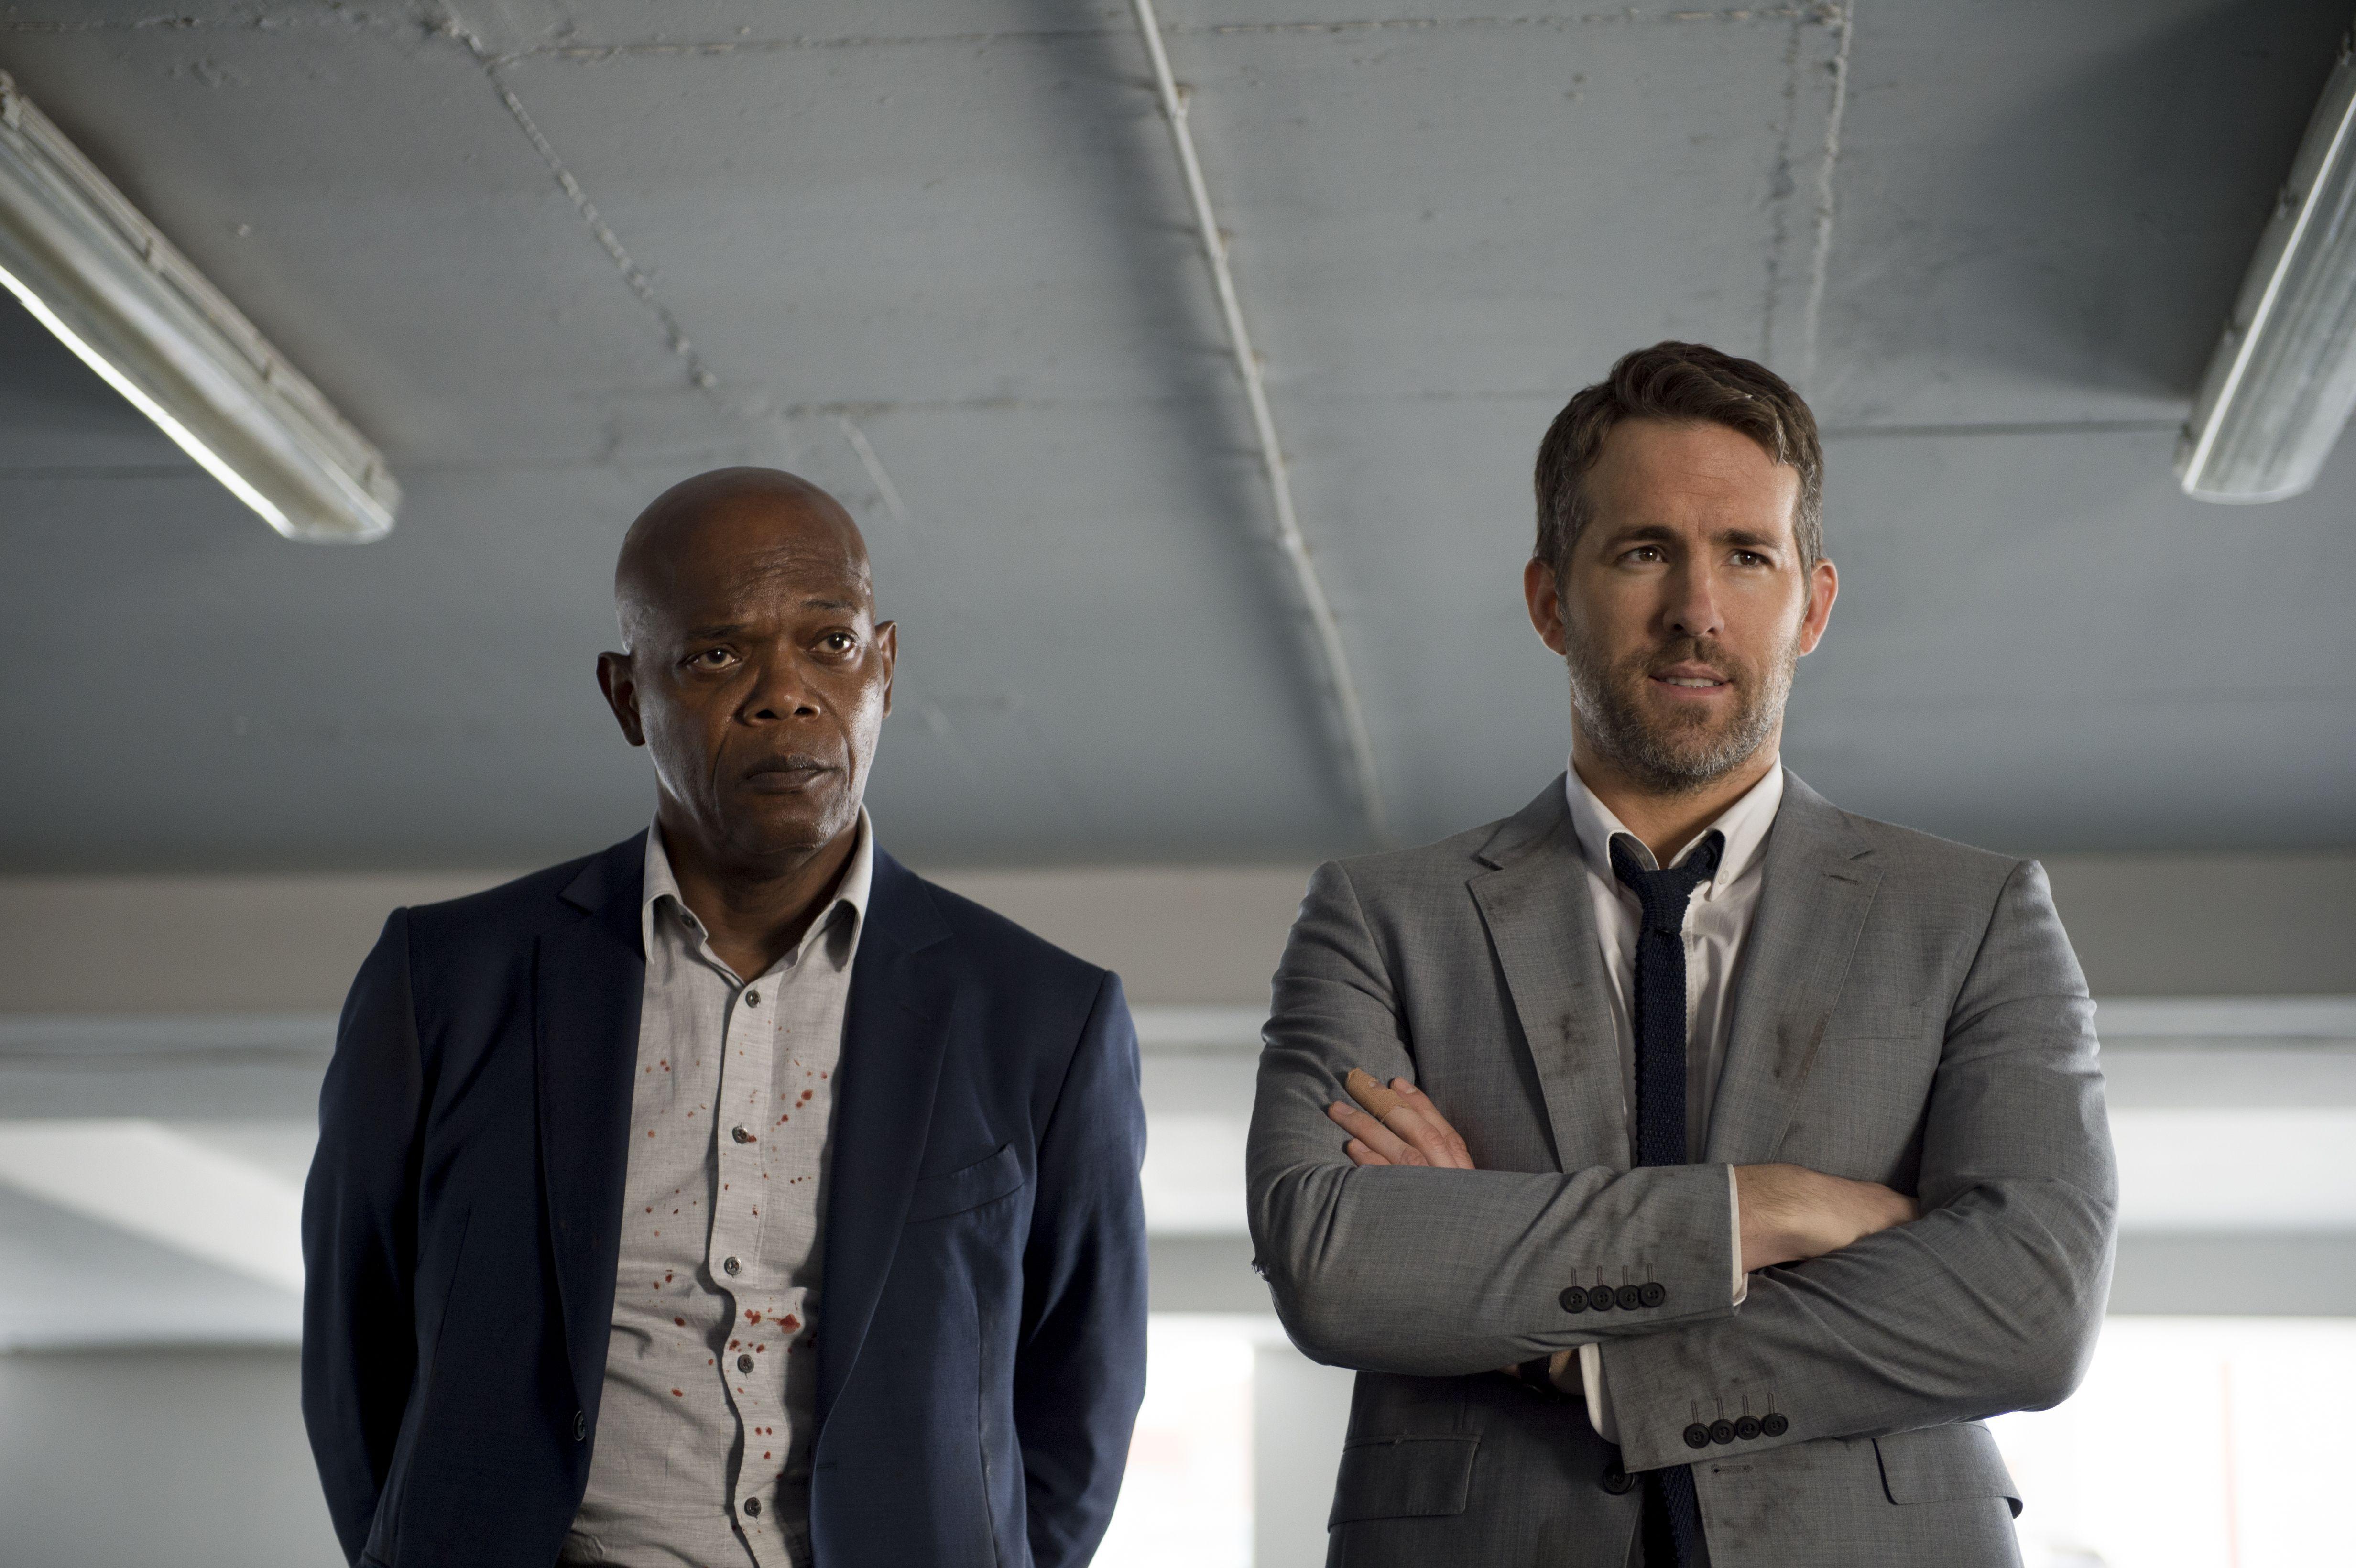 The Hitman's Bodyguard Screening: Win Free Tickets with Q&A